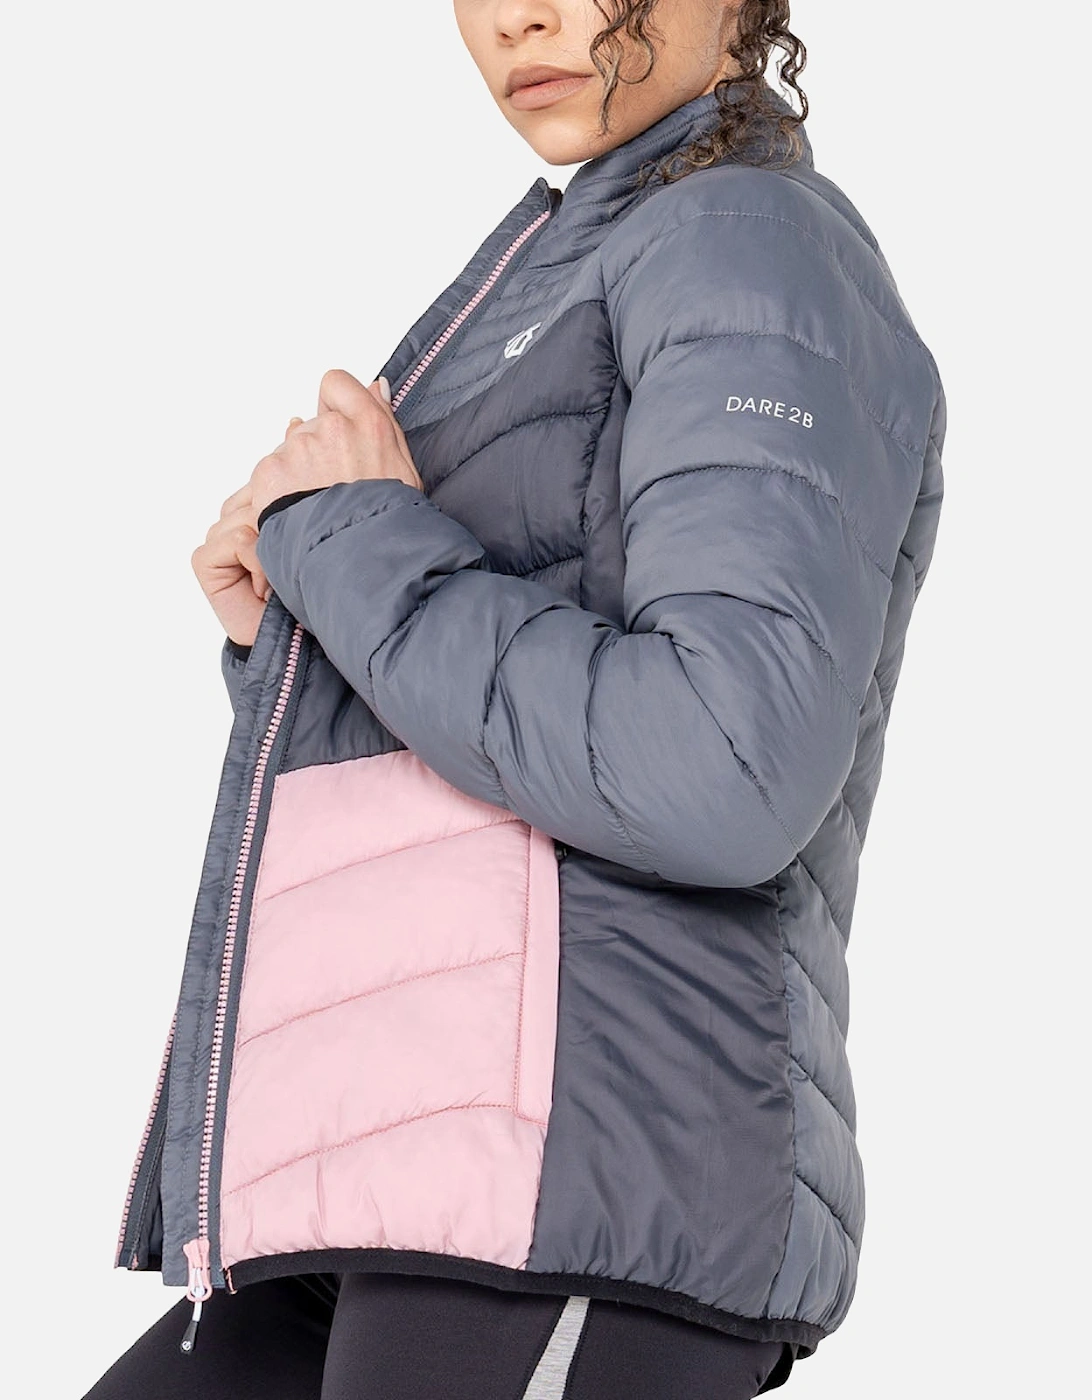 Womens Preact Quilted Outdoor Jacket - 6